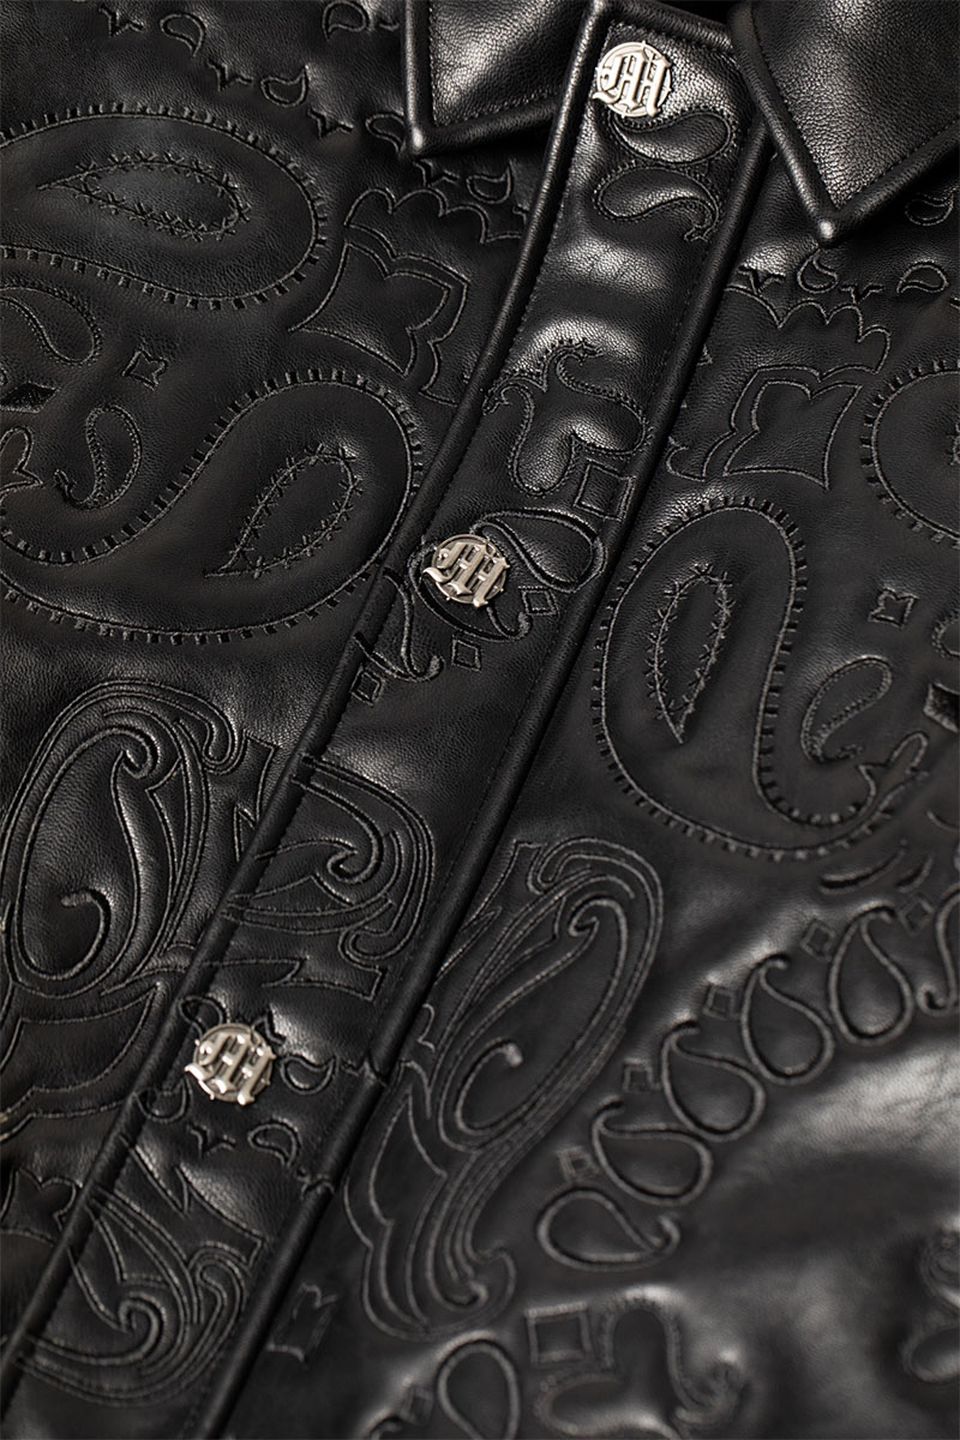 MENACE Makes a Statement With Paisley Leather Bombers